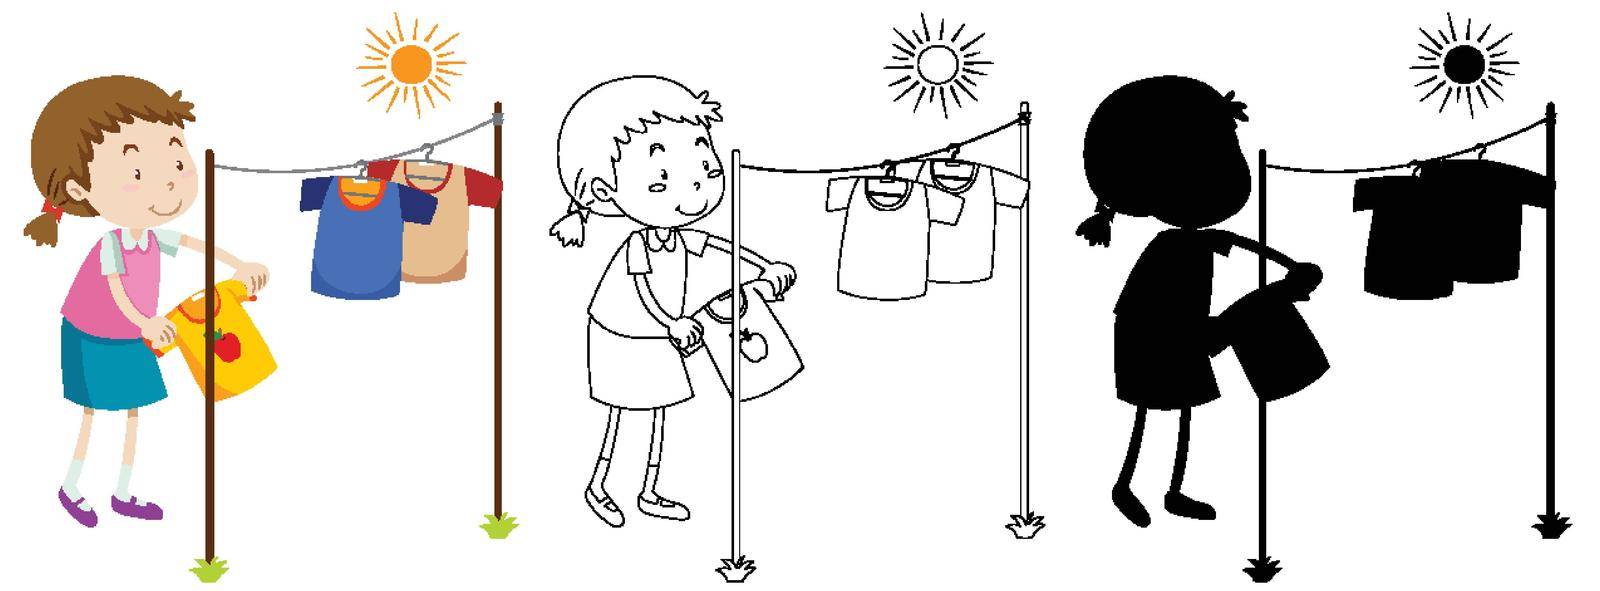 Girl hanging wet clothes out to dry with its outline and silhouette illustration